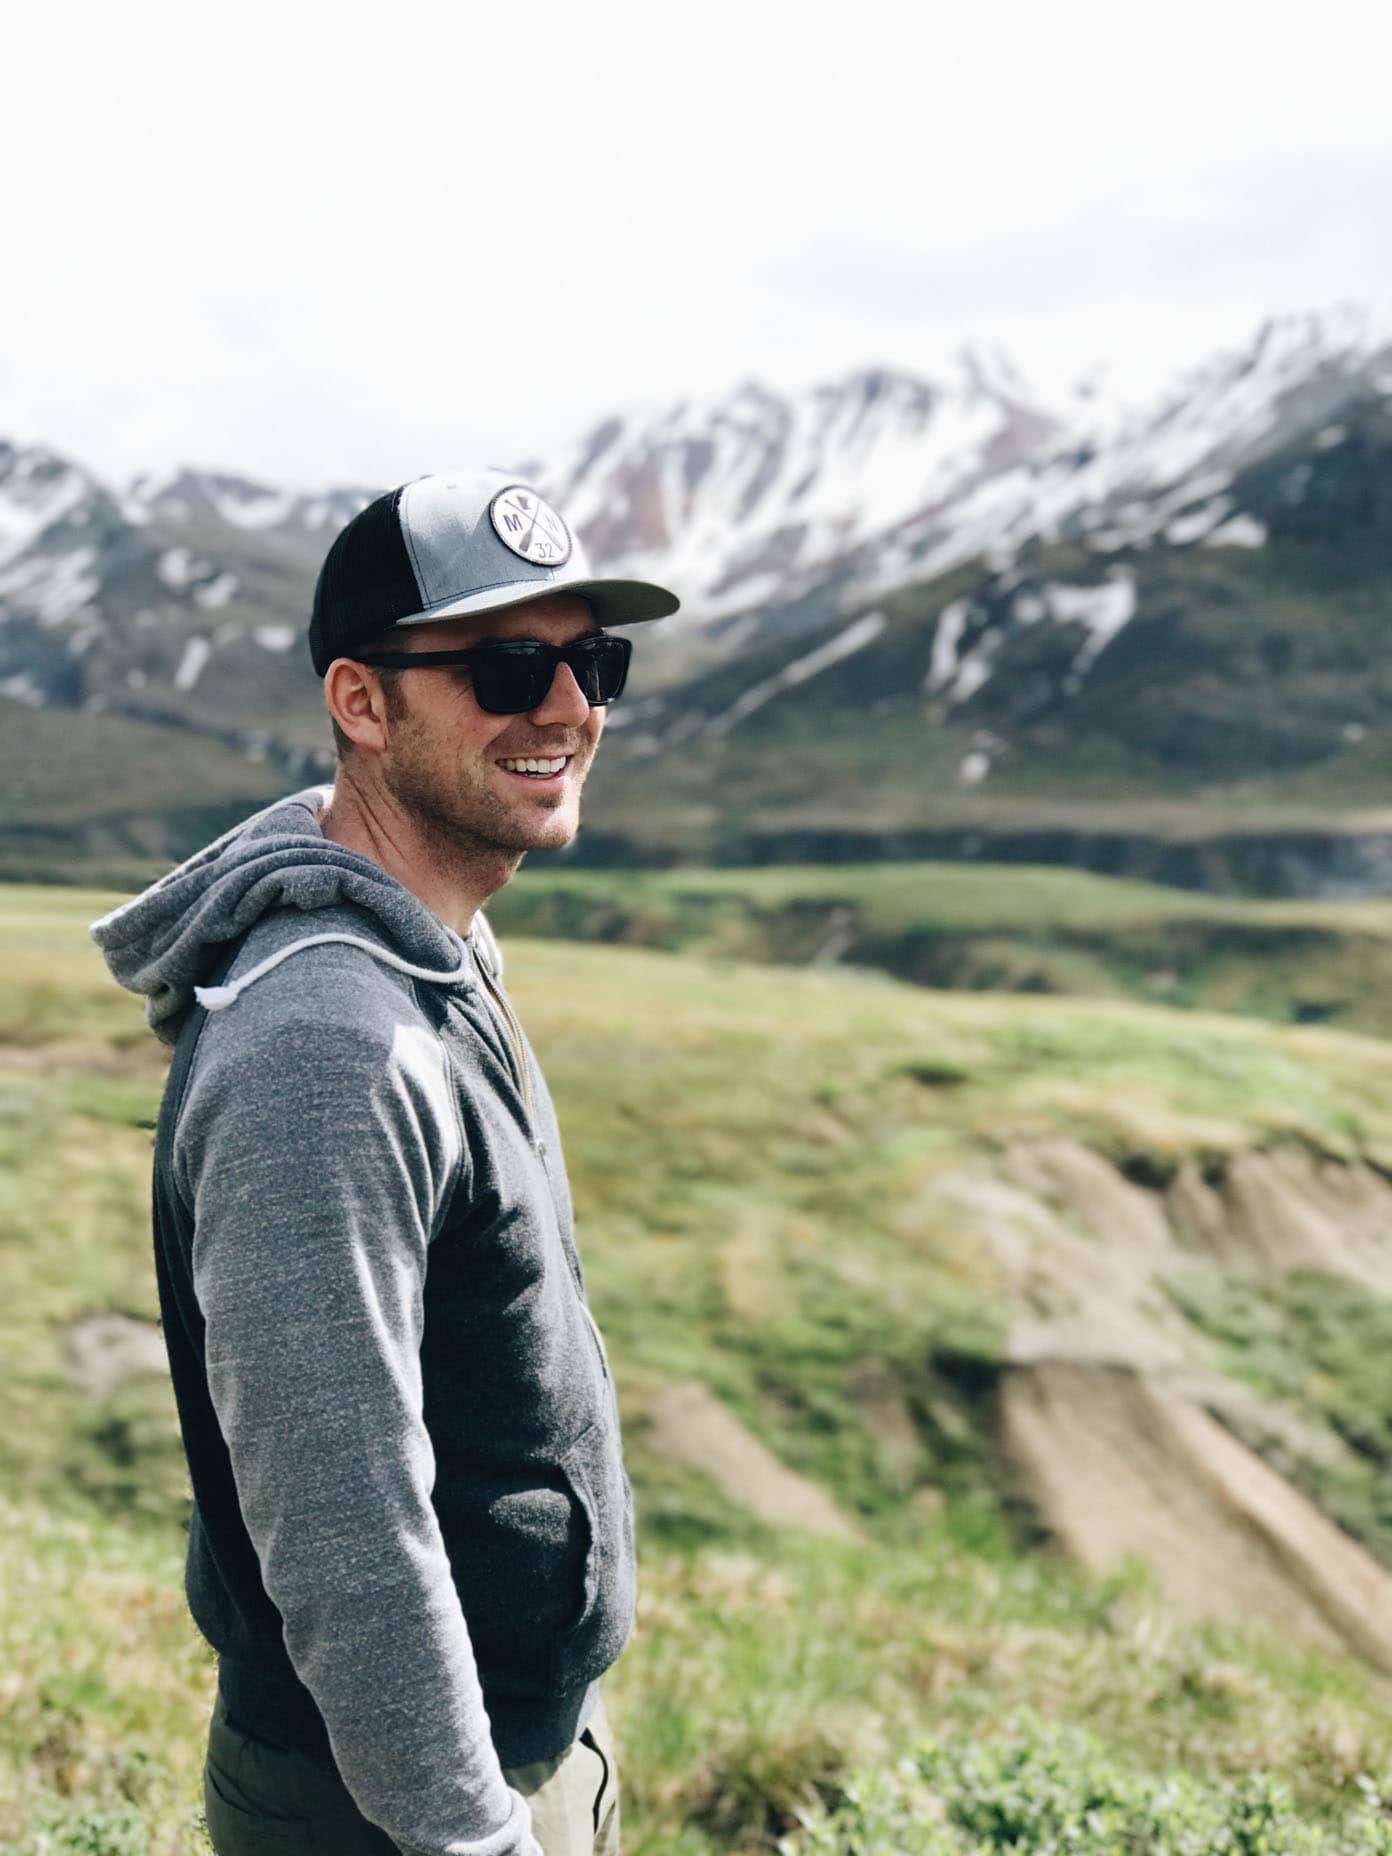 Man smiling with sunglasses in front of mountains.